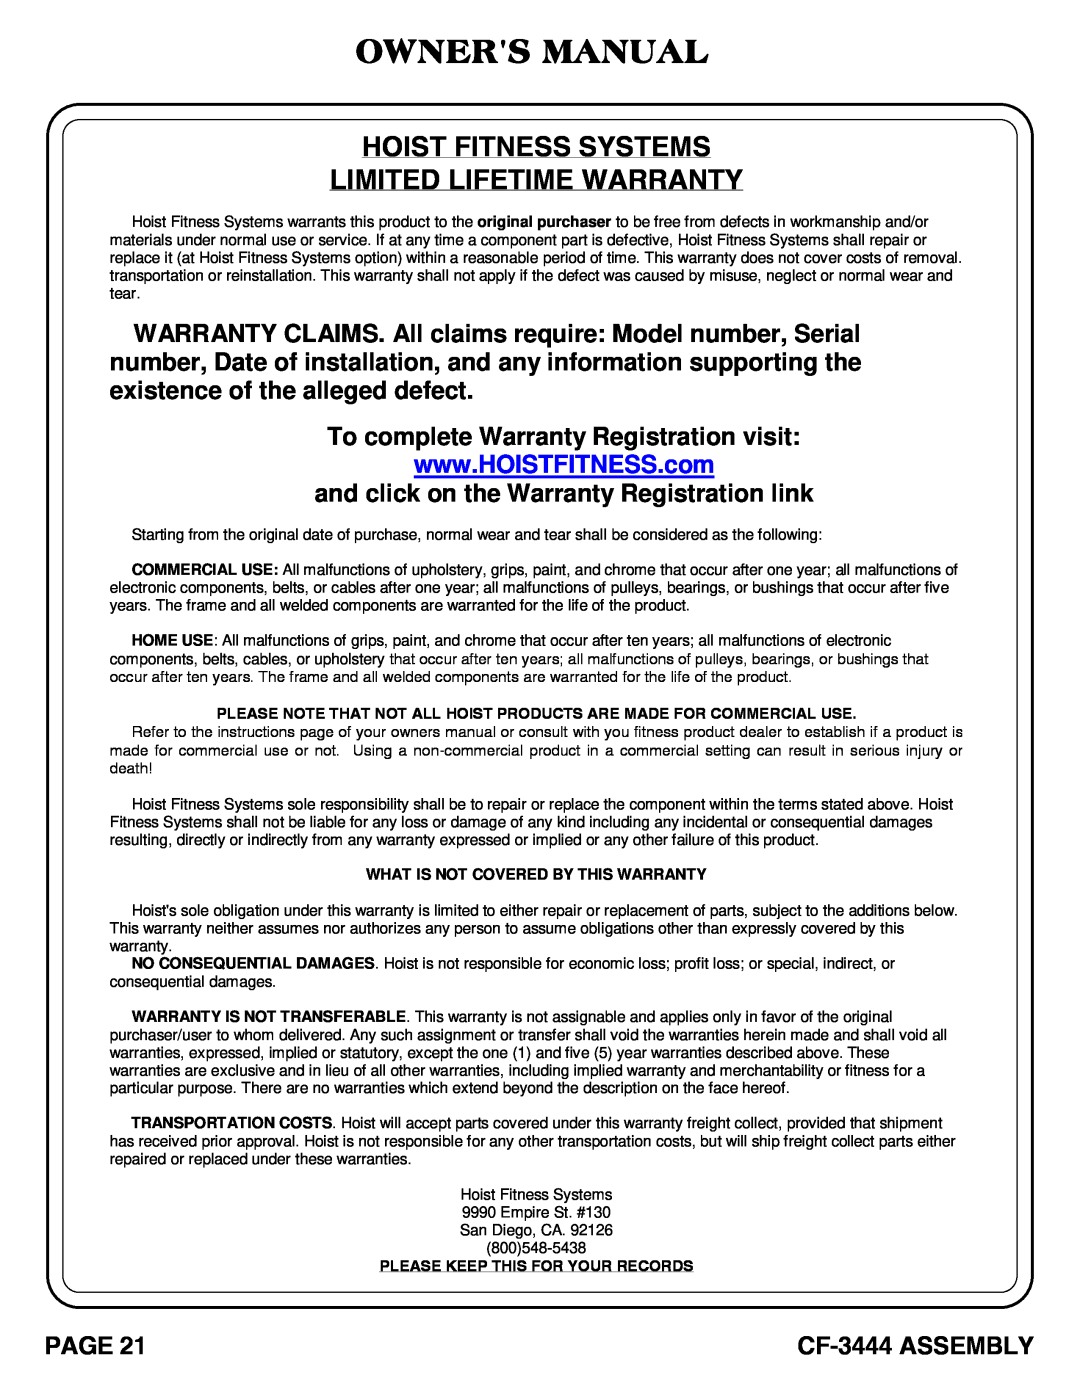 Hoist Fitness cf-3444 owner manual Owners Manual, Hoist Fitness Systems Limited Lifetime Warranty, CF-3444 ASSEMBLY 